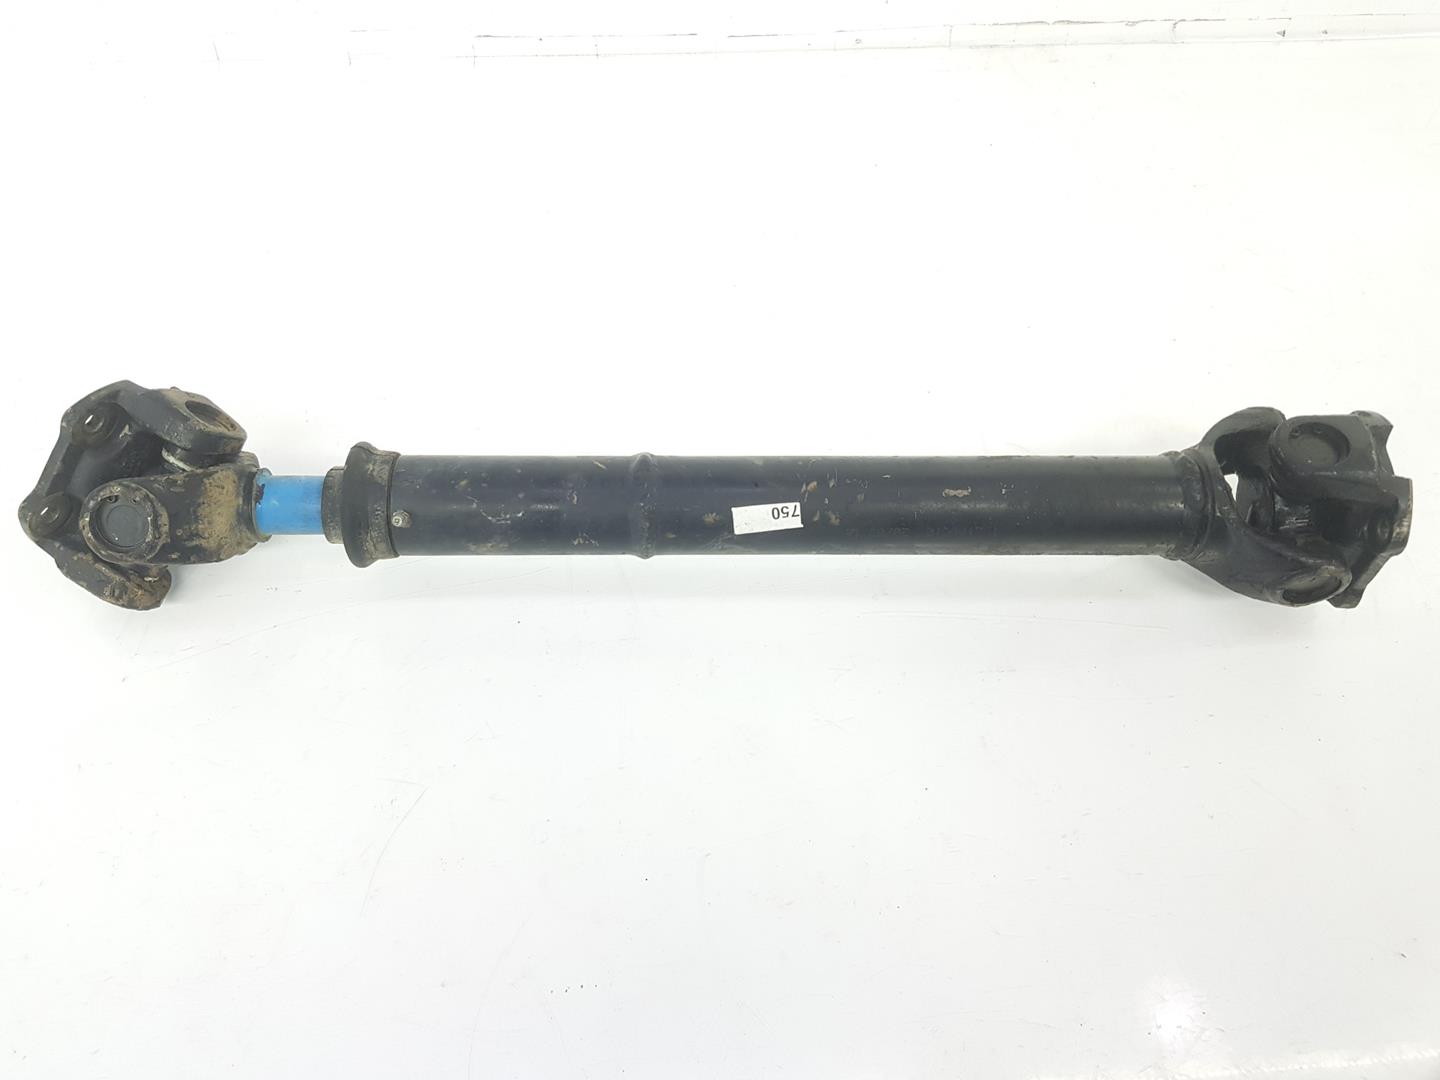 LAND ROVER Discovery 1 generation (1989-1997) Gearbox Short Propshaft TVB000150, FTC3705 19804910